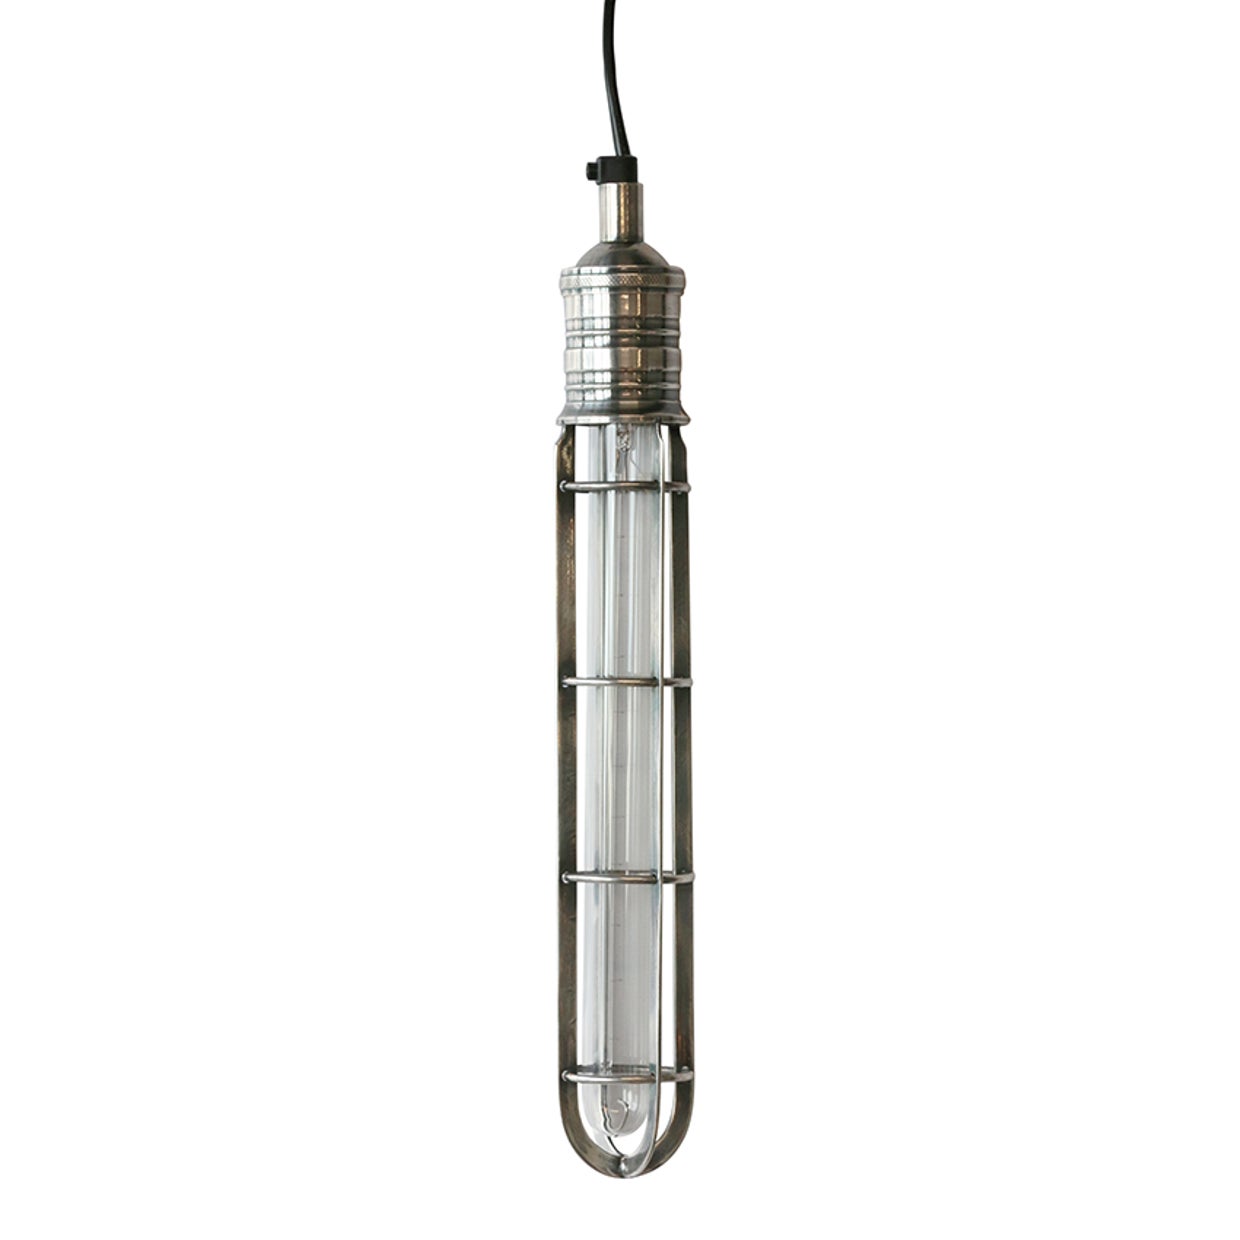 CAGE TUBE HANGING LIGHT